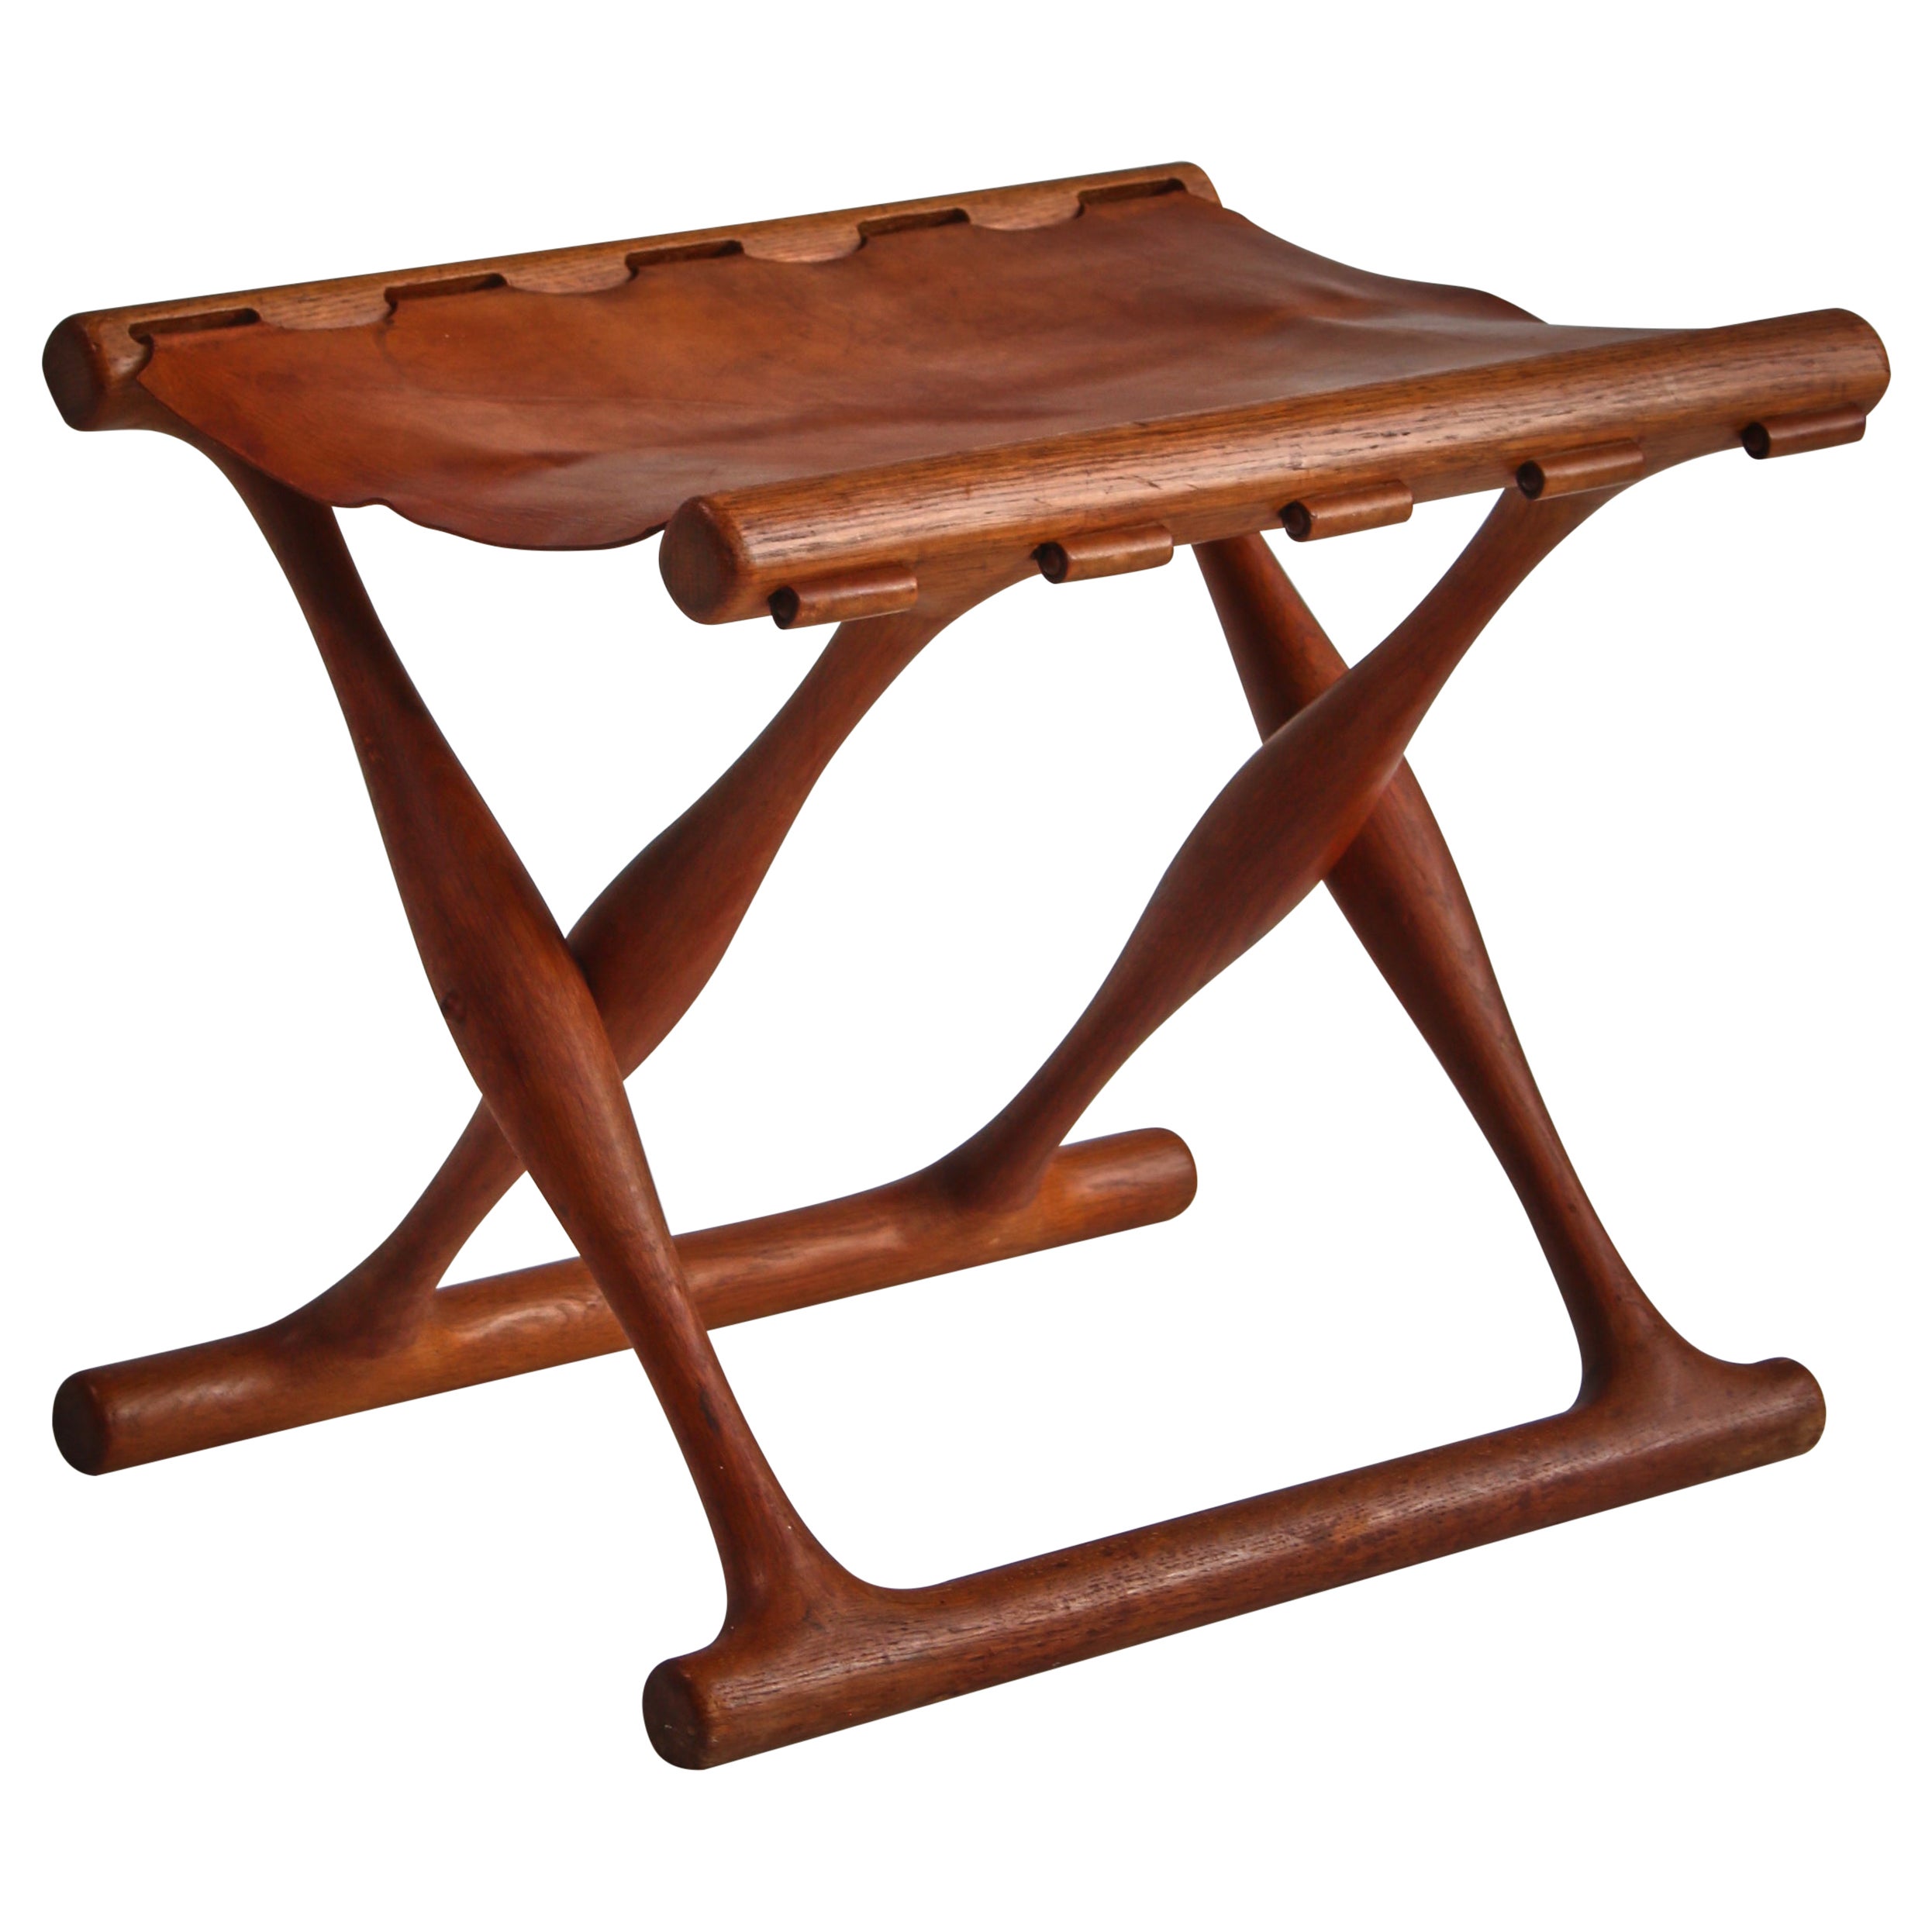 Danish Modern "Gold Hill" Stool in Oak and Saddle Leather by Poul Hundevad, 1960 For Sale